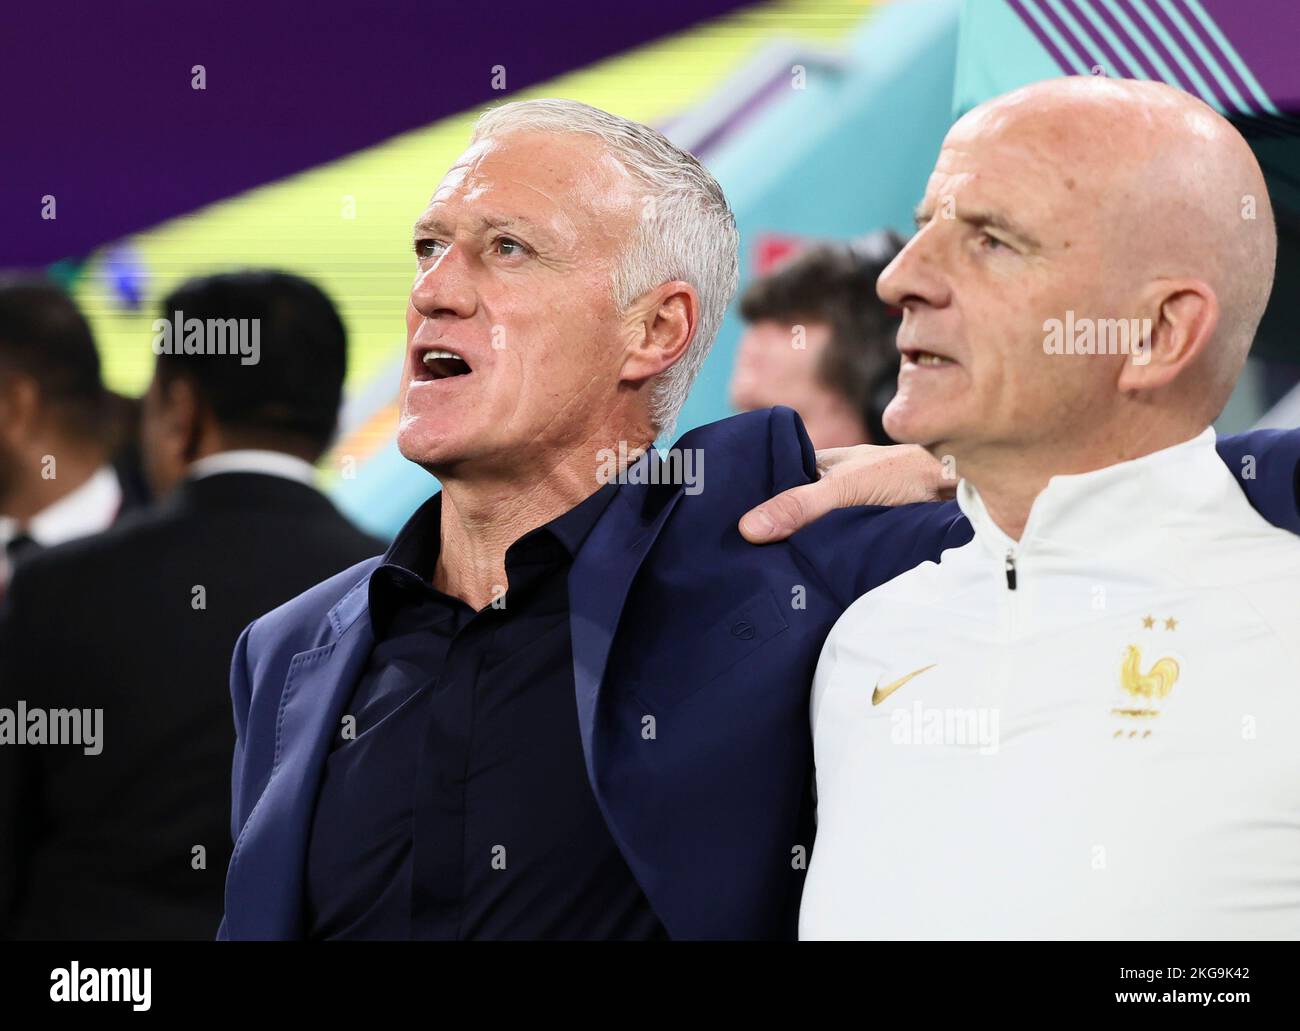 Al Wakrah, Qatar. 22nd Nov, 2022. Didier Deschamps (L), head coach of France, looks on prior to the Group D match between France and Australia of the 2022 FIFA World Cup at Al Janoub Stadium in Al Wakrah, Qatar, Nov. 22, 2022. Credit: Lan Hongguang/Xinhua/Alamy Live News Stock Photo